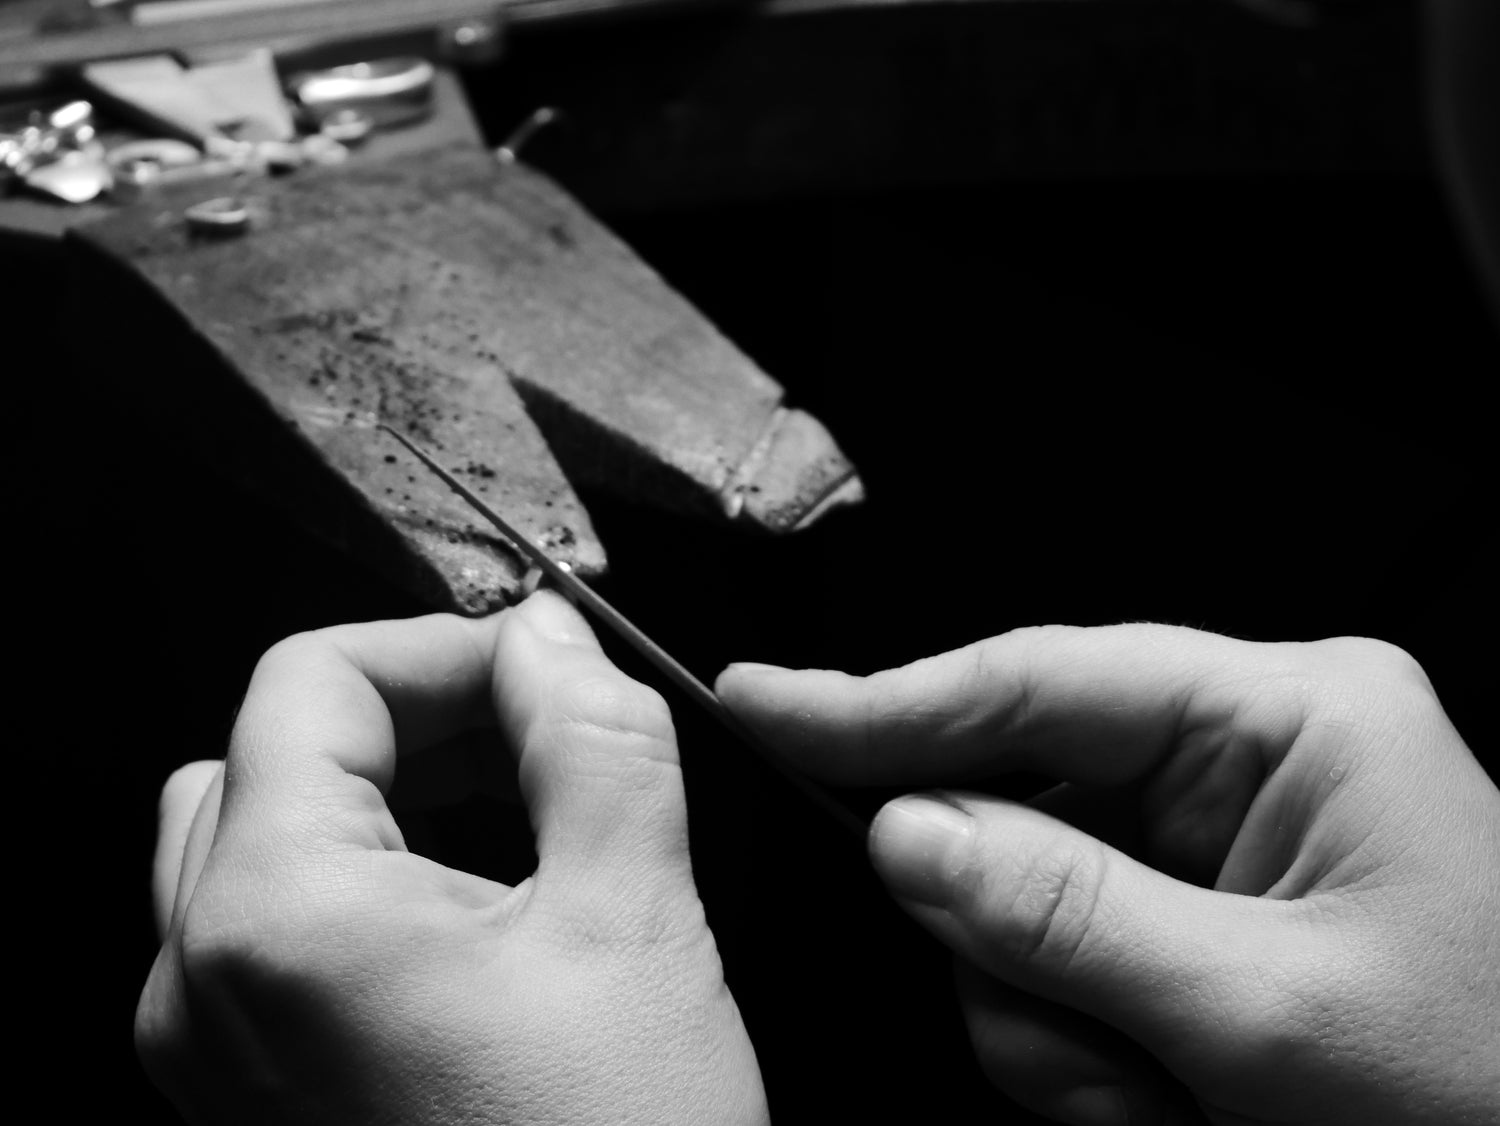 Two hands make jewellery at a jewellery bench.